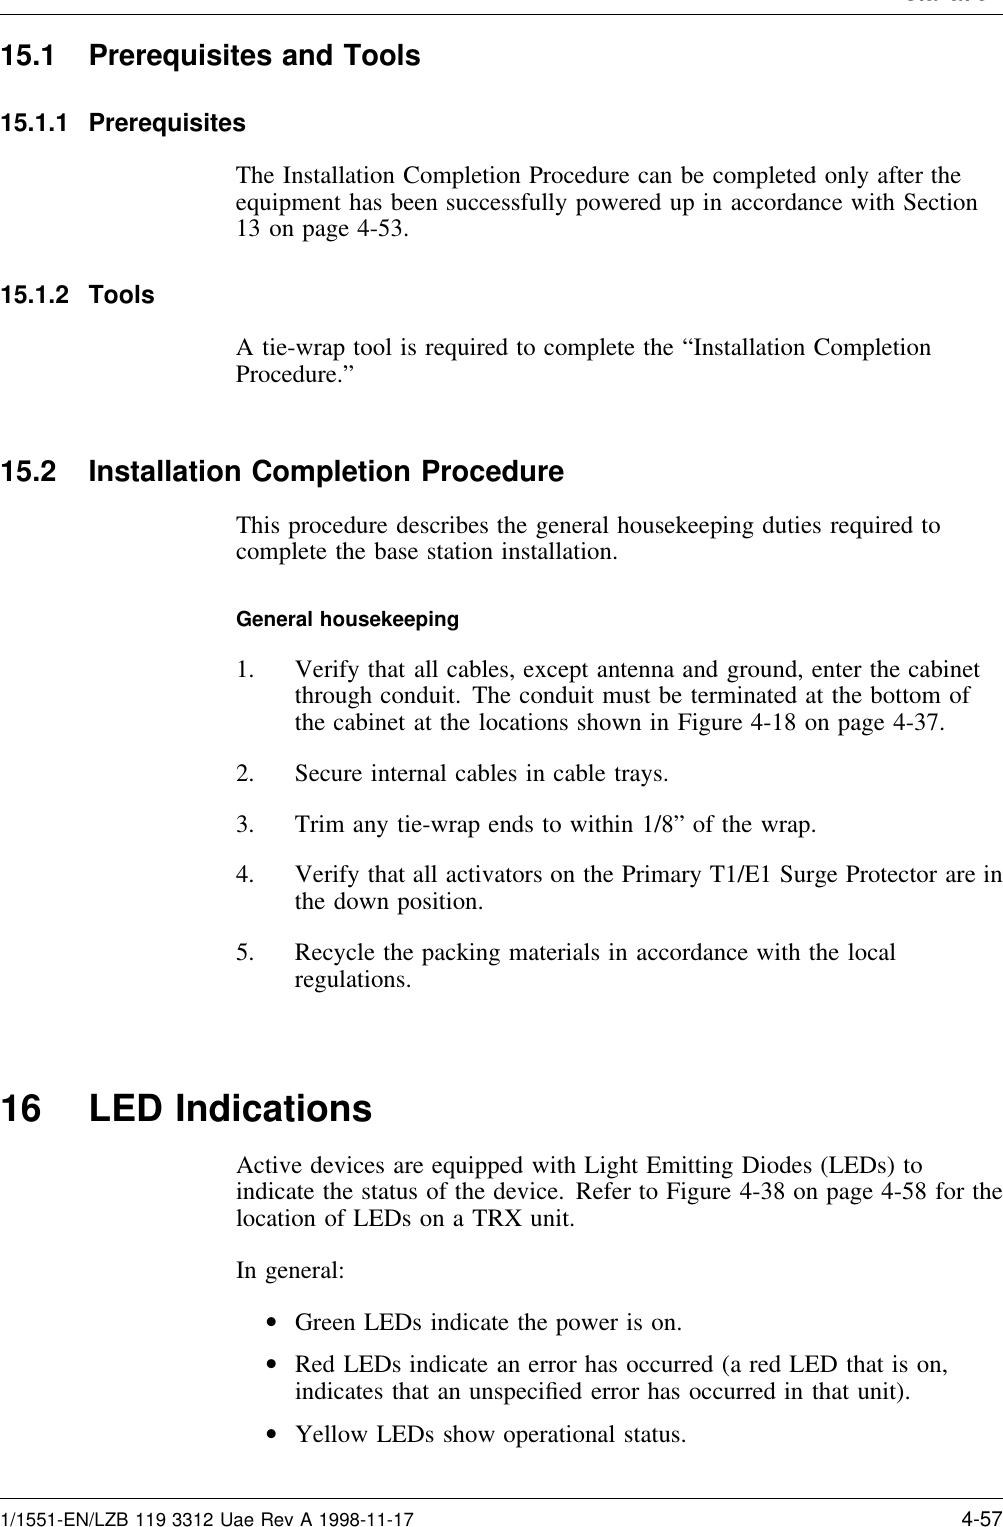 Installation15.1 Prerequisites and Tools15.1.1 PrerequisitesThe Installation Completion Procedure can be completed only after theequipment has been successfully powered up in accordance with Section13 on page 4-53.15.1.2 ToolsA tie-wrap tool is required to complete the “Installation CompletionProcedure.”15.2 Installation Completion ProcedureThis procedure describes the general housekeeping duties required tocomplete the base station installation.General housekeeping1. Verify that all cables, except antenna and ground, enter the cabinetthrough conduit. The conduit must be terminated at the bottom ofthe cabinet at the locations shown in Figure 4-18 on page 4-37.2. Secure internal cables in cable trays.3. Trim any tie-wrap ends to within 1/8” of the wrap.4. Verify that all activators on the Primary T1/E1 Surge Protector are inthe down position.5. Recycle the packing materials in accordance with the localregulations.16 LED IndicationsActive devices are equipped with Light Emitting Diodes (LEDs) toindicate the status of the device. Refer to Figure 4-38 on page 4-58 for thelocation of LEDs on a TRX unit.In general:•Green LEDs indicate the power is on.•Red LEDs indicate an error has occurred (a red LED that is on,indicates that an unspeciﬁed error has occurred in that unit).•Yellow LEDs show operational status.1/1551-EN/LZB 119 3312 Uae Rev A 1998-11-17 4-57